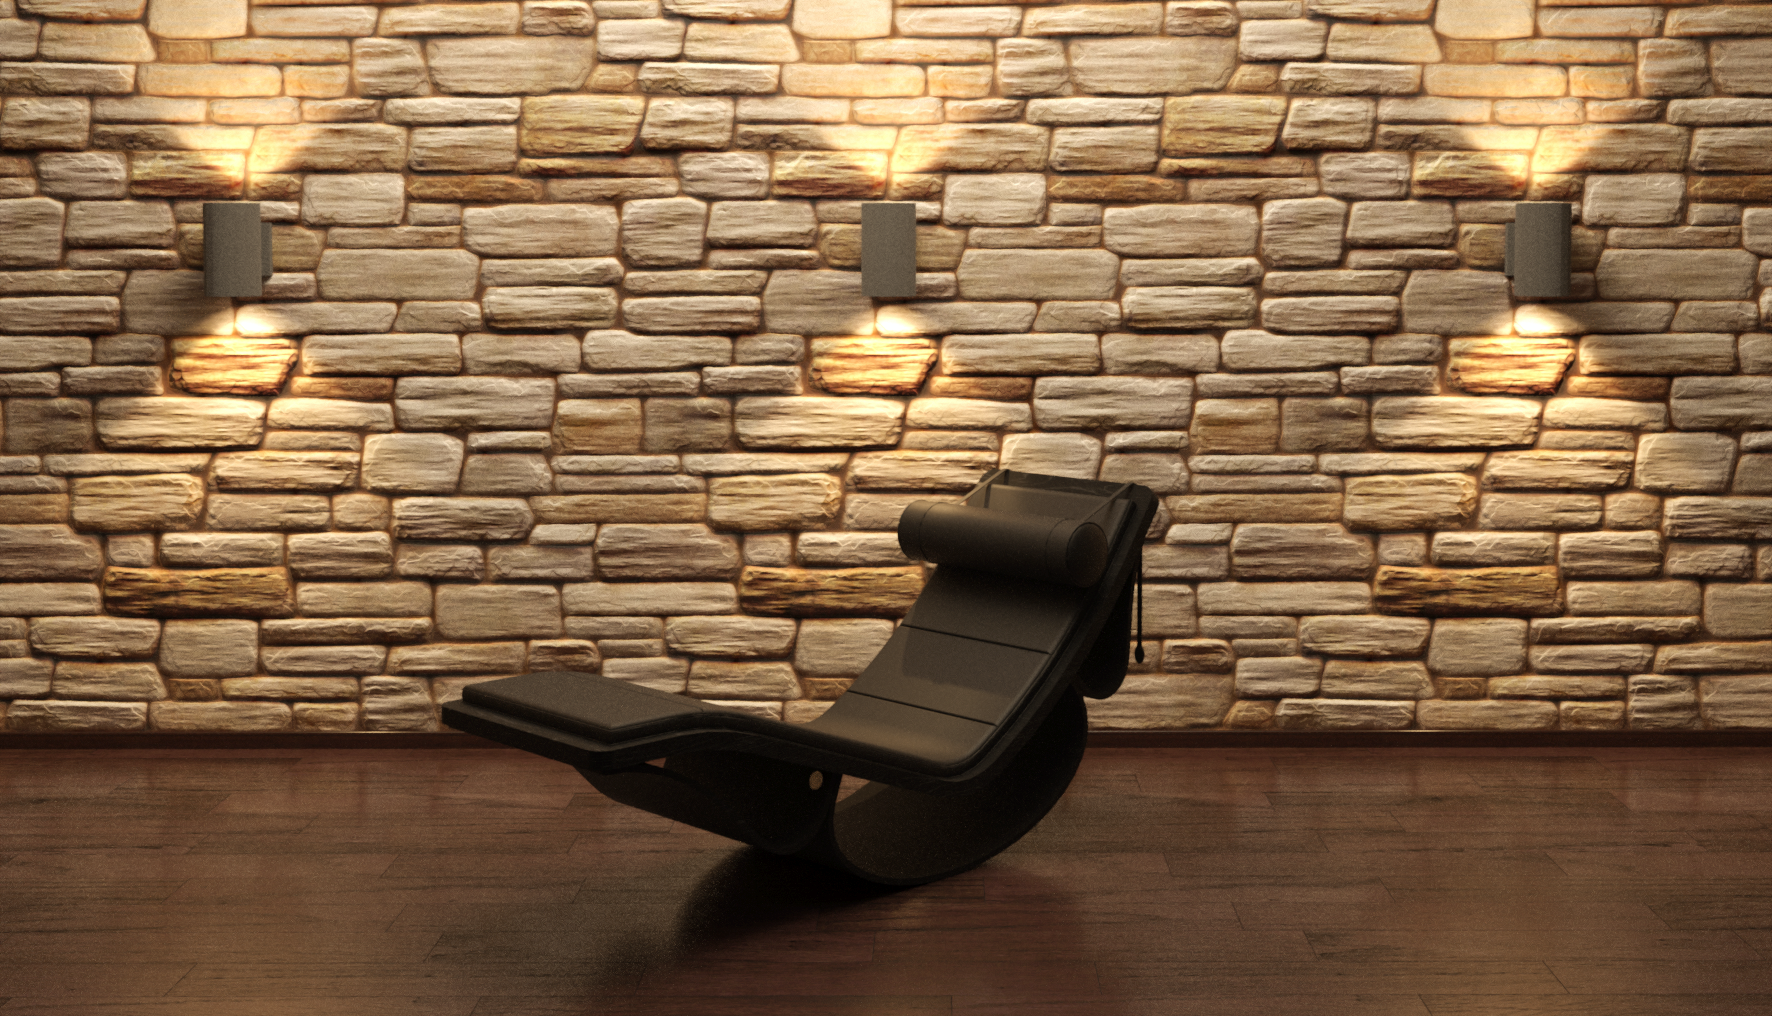 Revit render showing the Rio chaise lounge rocking chair.